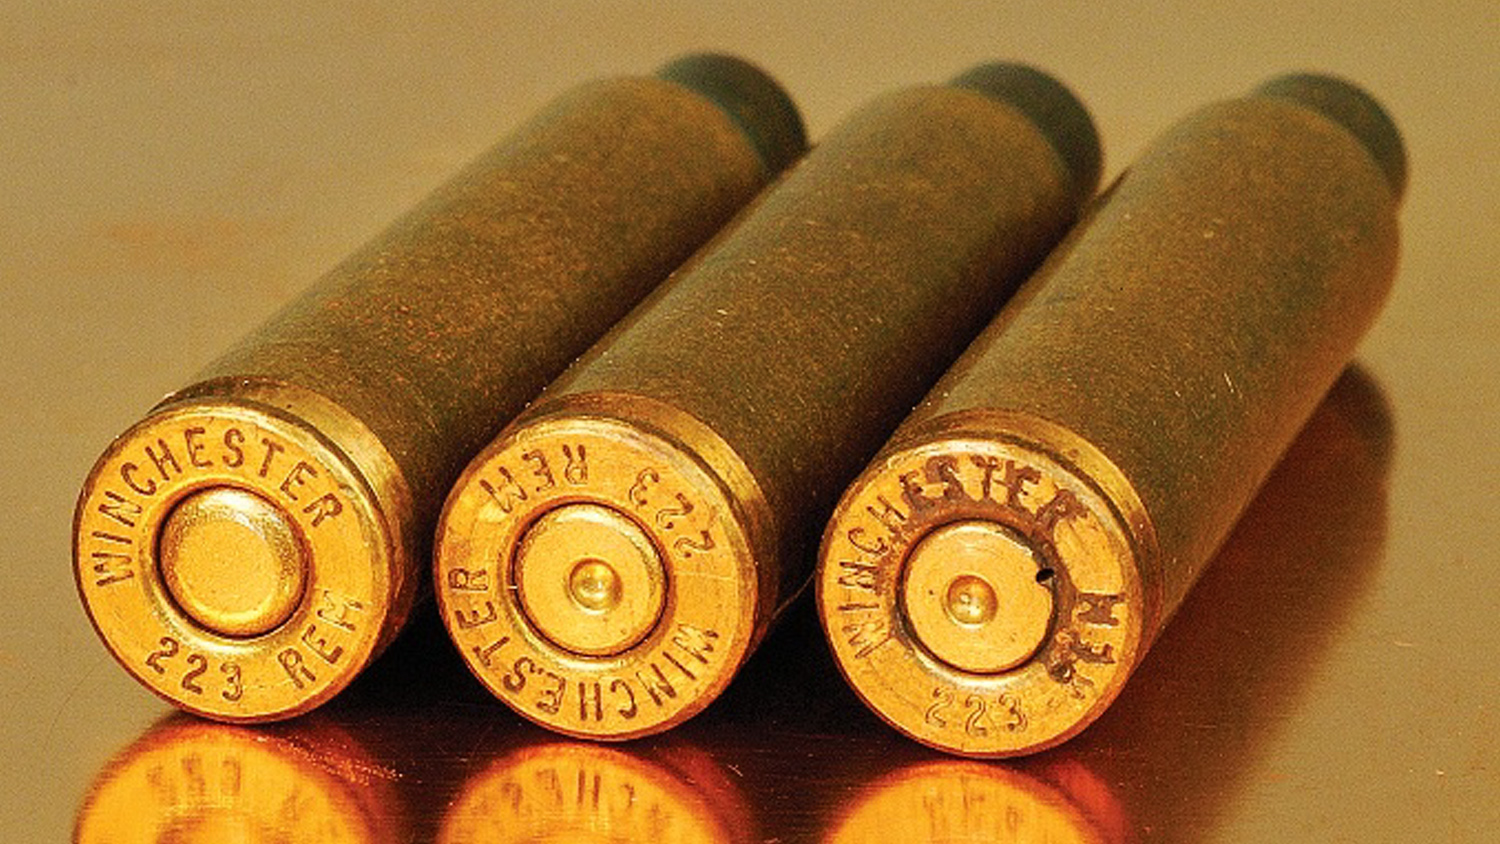 Safety margins for rifle ammo primers